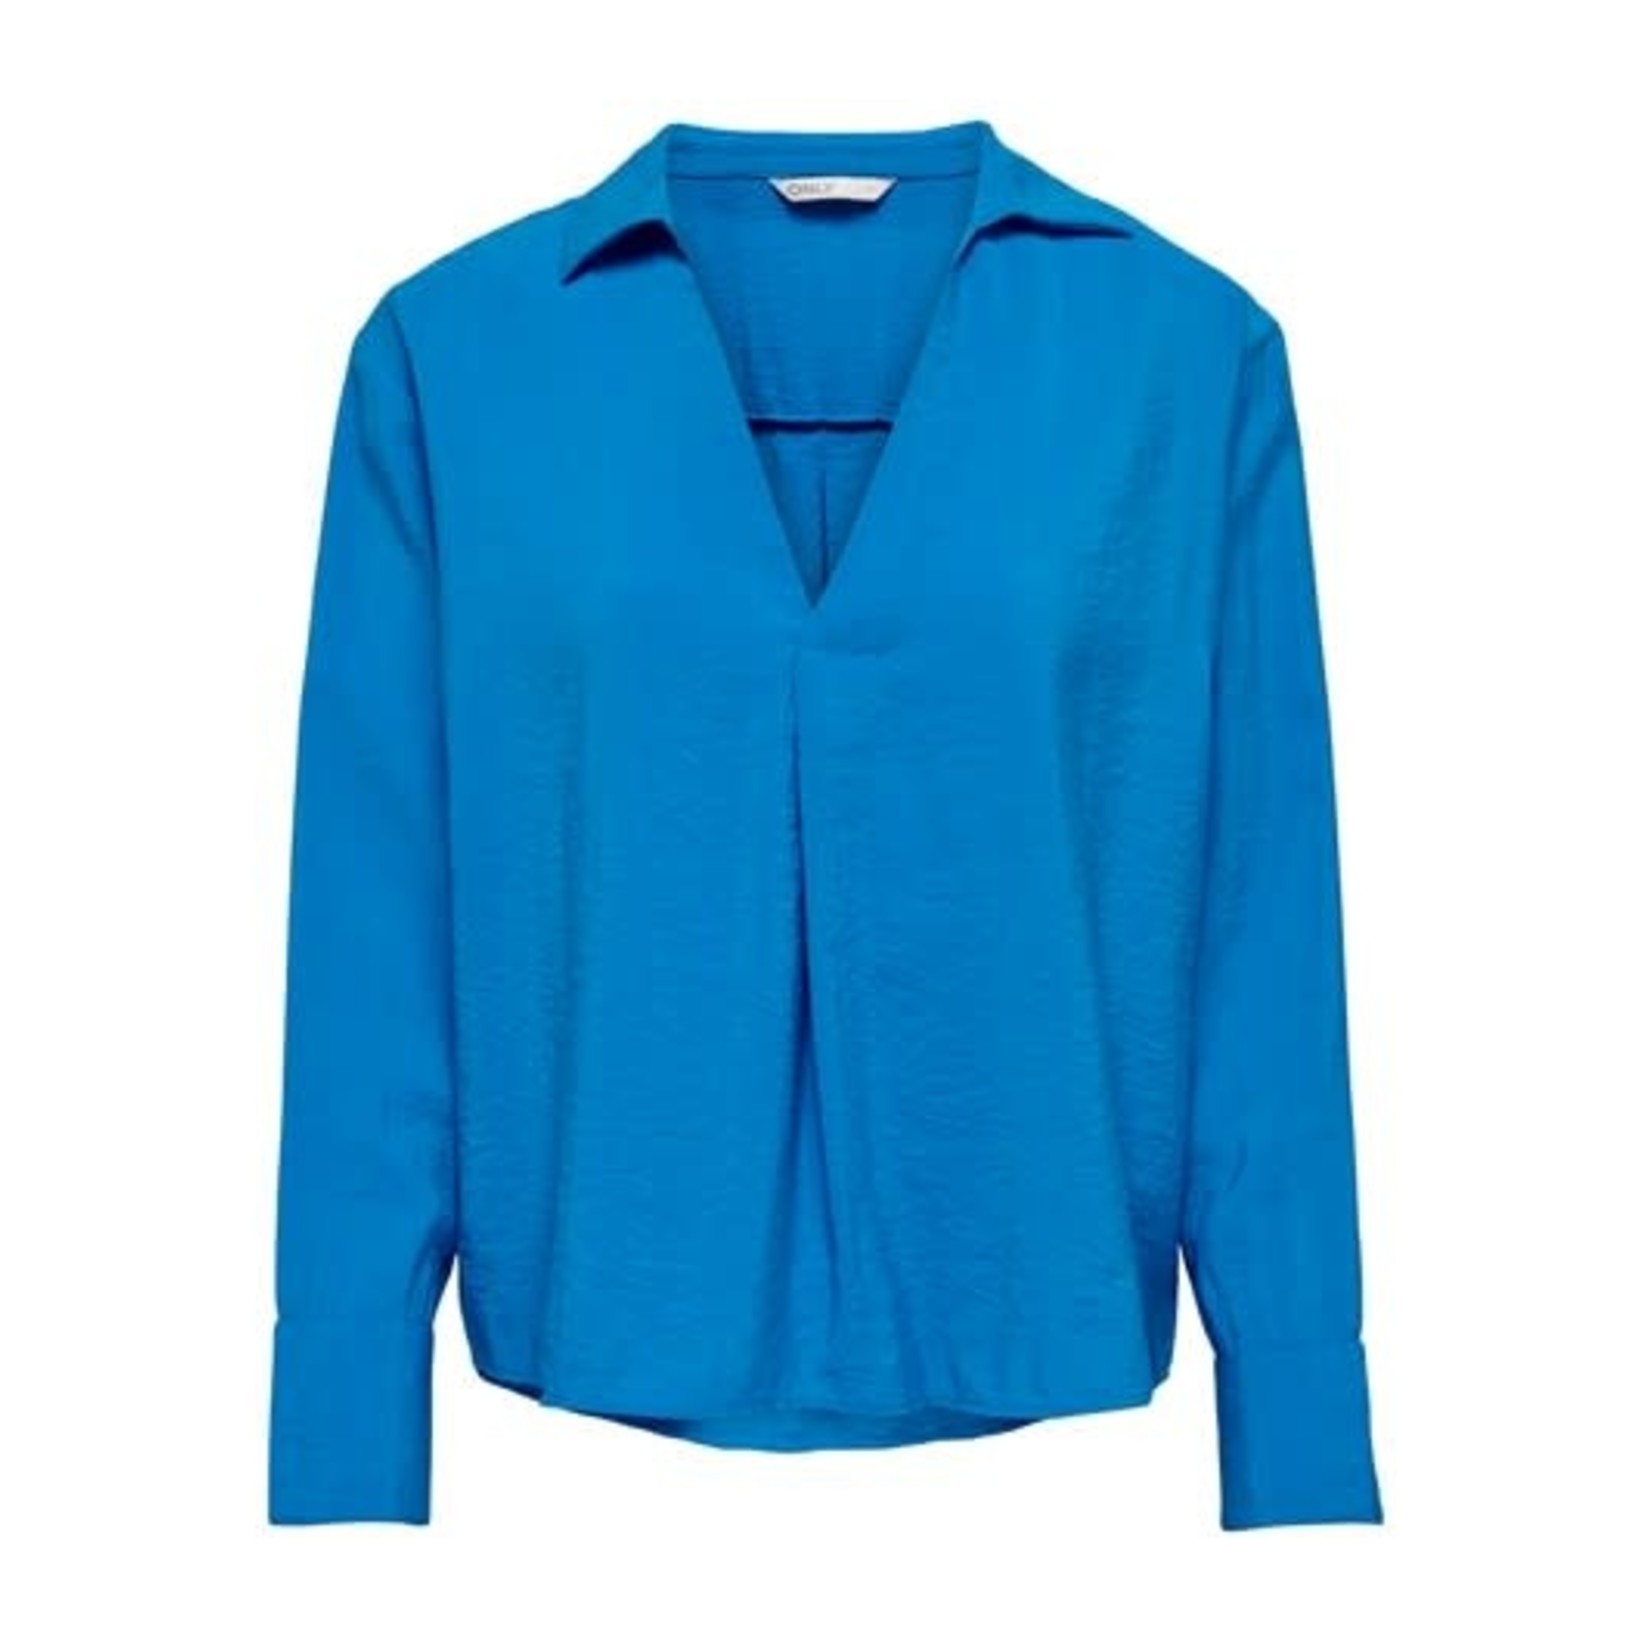 Only Kate Blouse Brilliant Blue